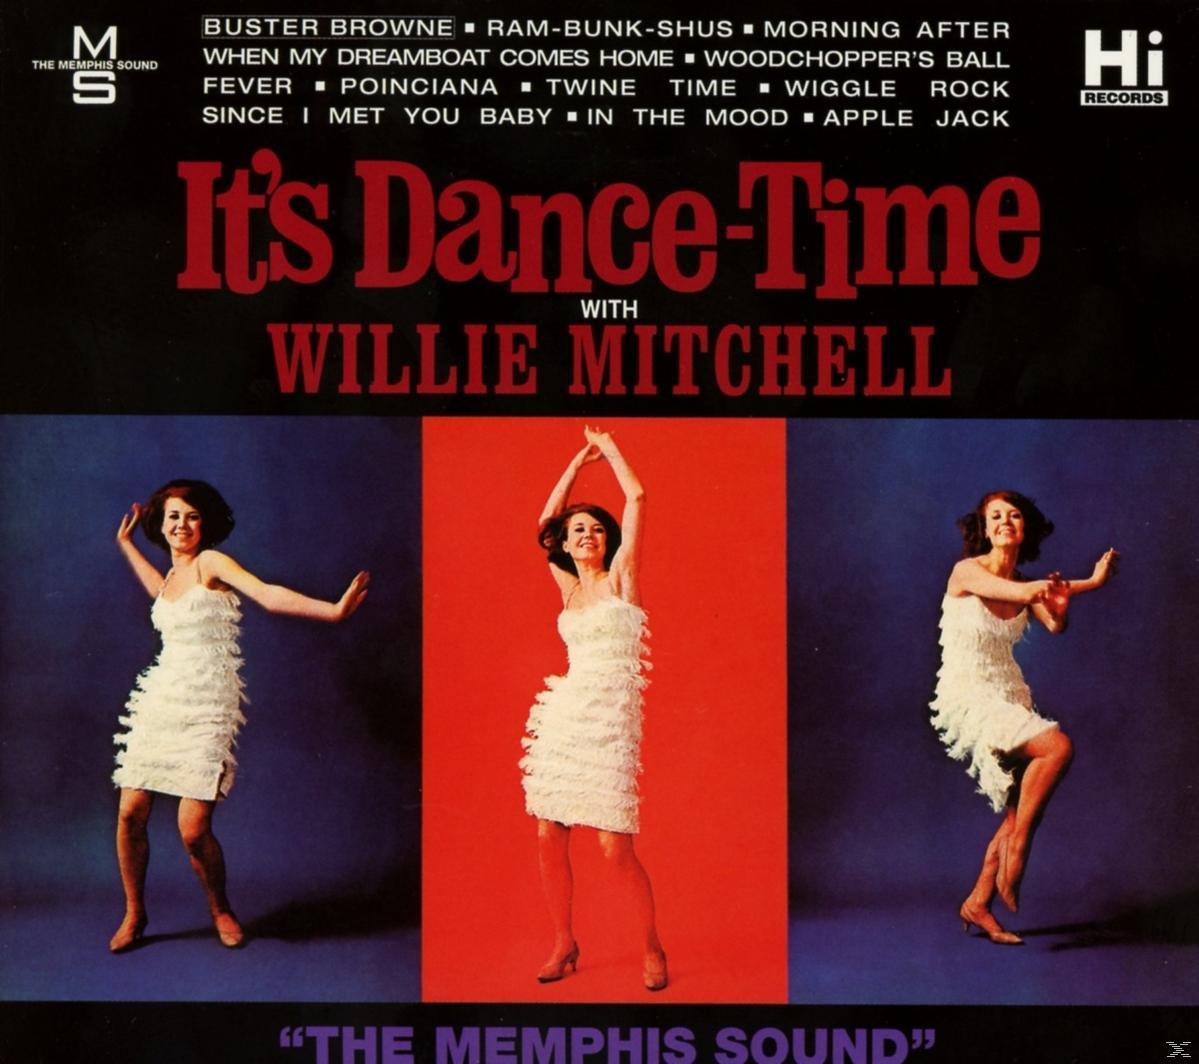 Mitchell - Willie - It\'s Dance-Time (CD)